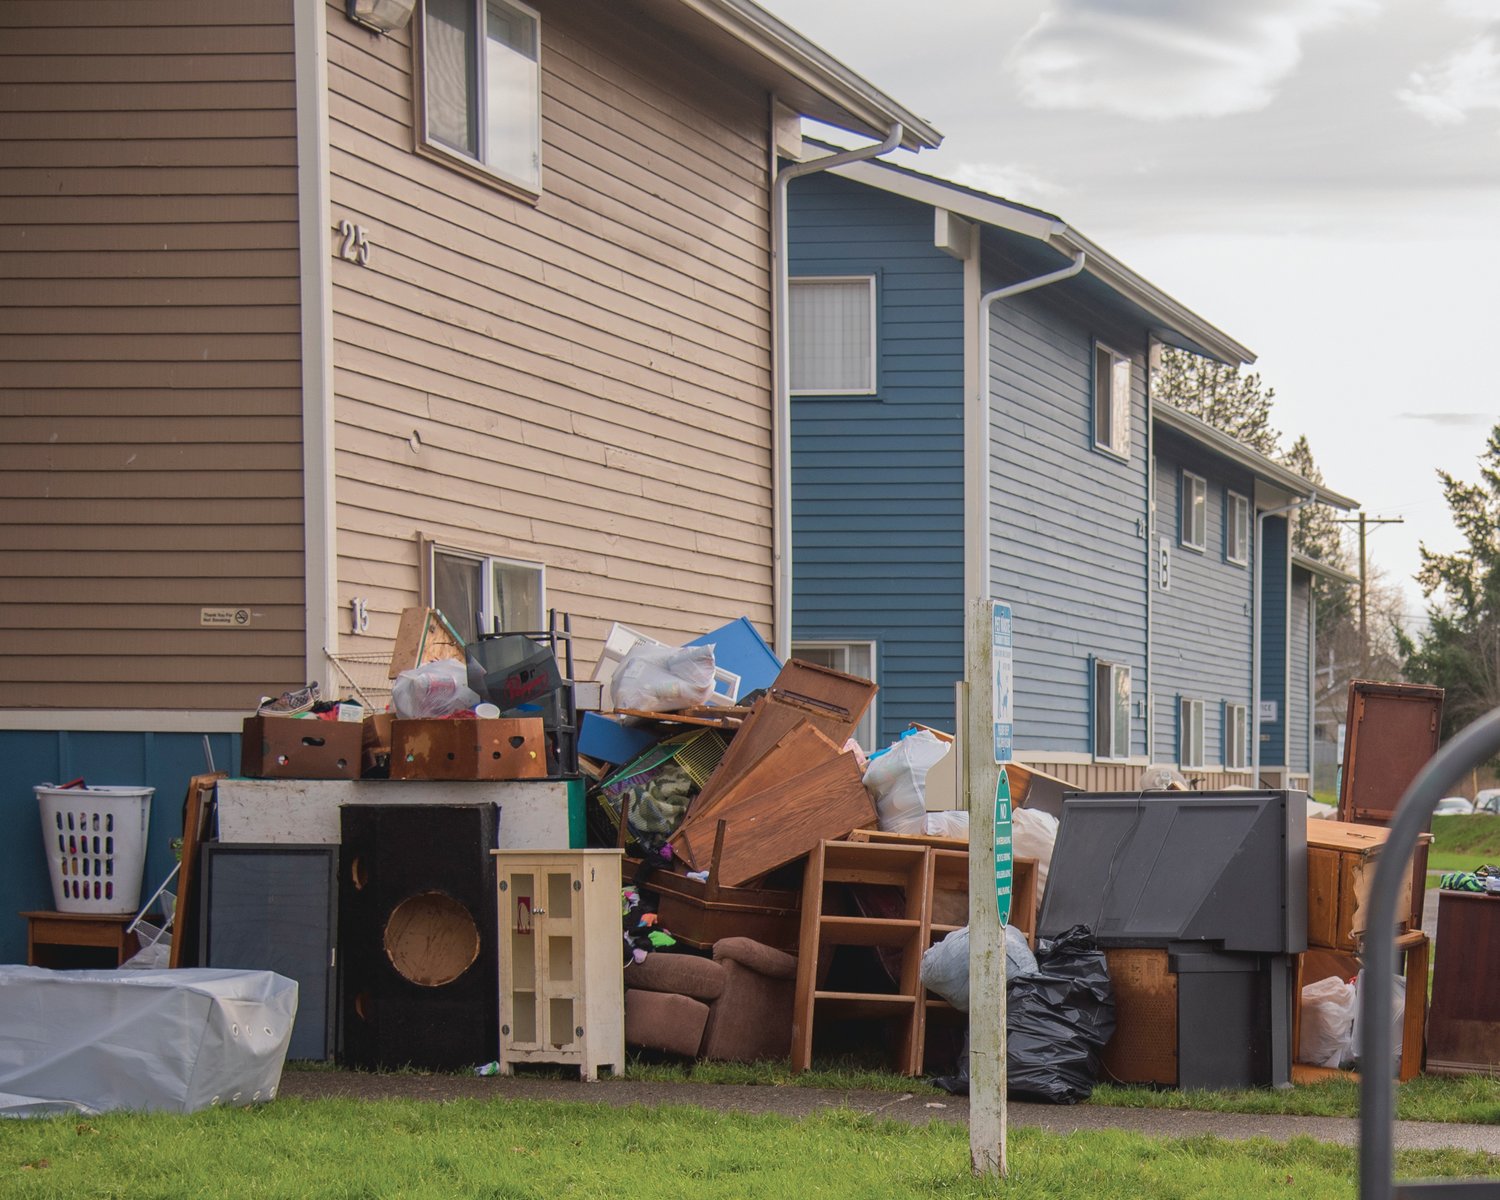 Furniture sits stacked outside the Chehalis Avenue Apartments in Chehalis after flood waters flowed through lower level apartments.